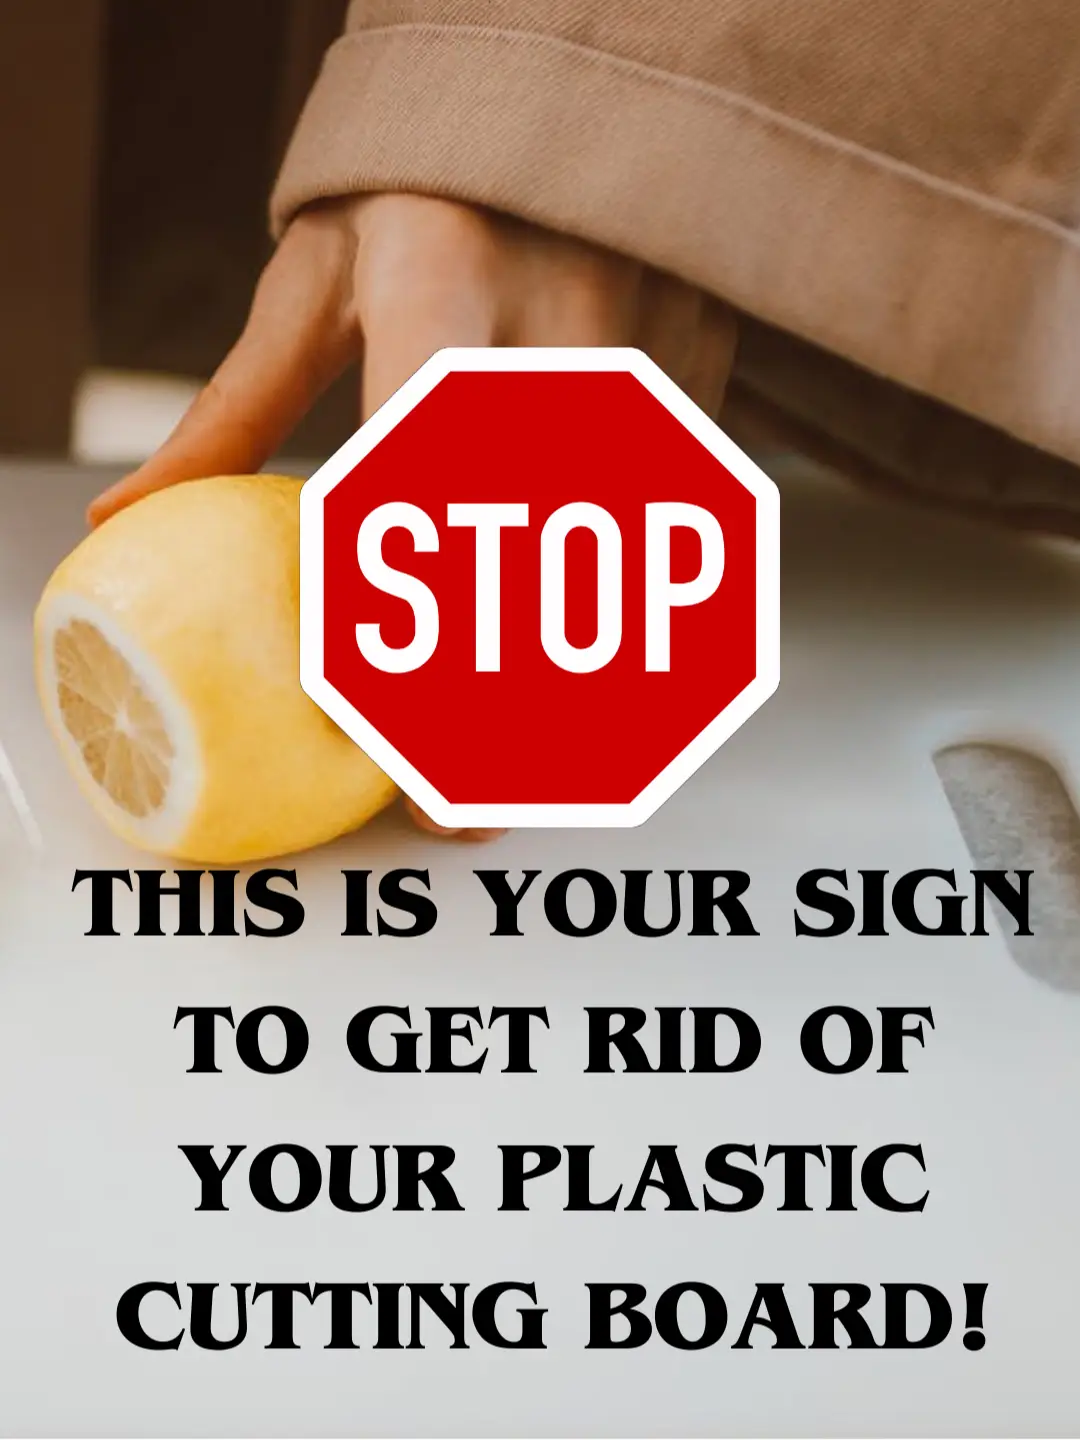 SIGN TO THROW AWAY YOUR PLASTIC CUTTING BOARD 🤢🤮